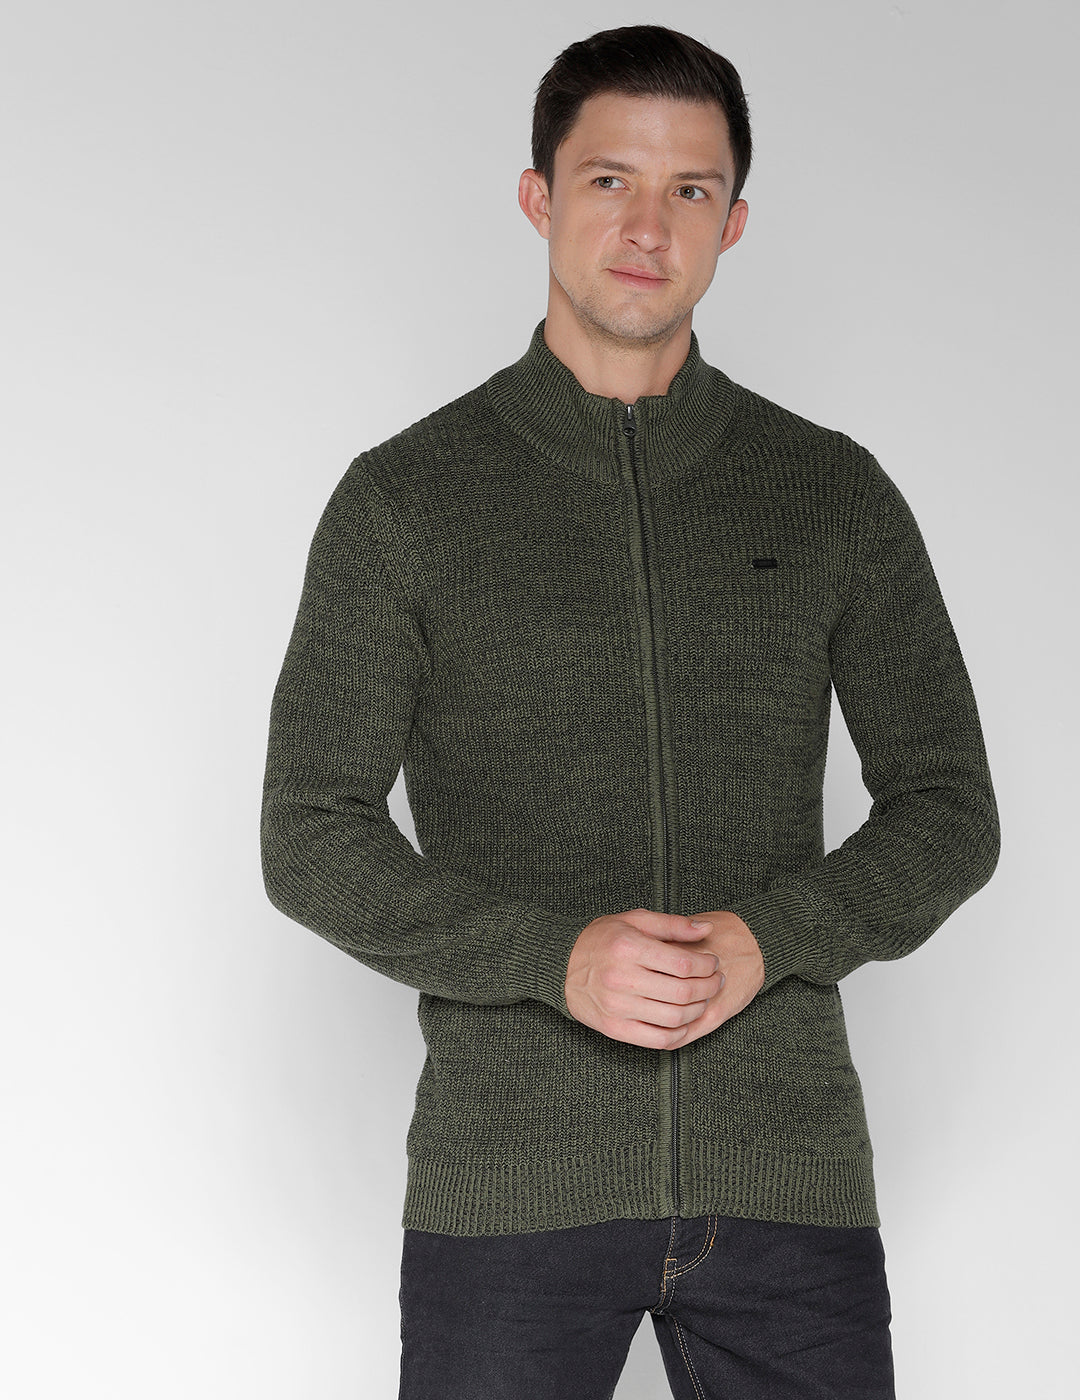 Identiti Full Sleeve Solid Slim Fit Cotton Casual Pull Over